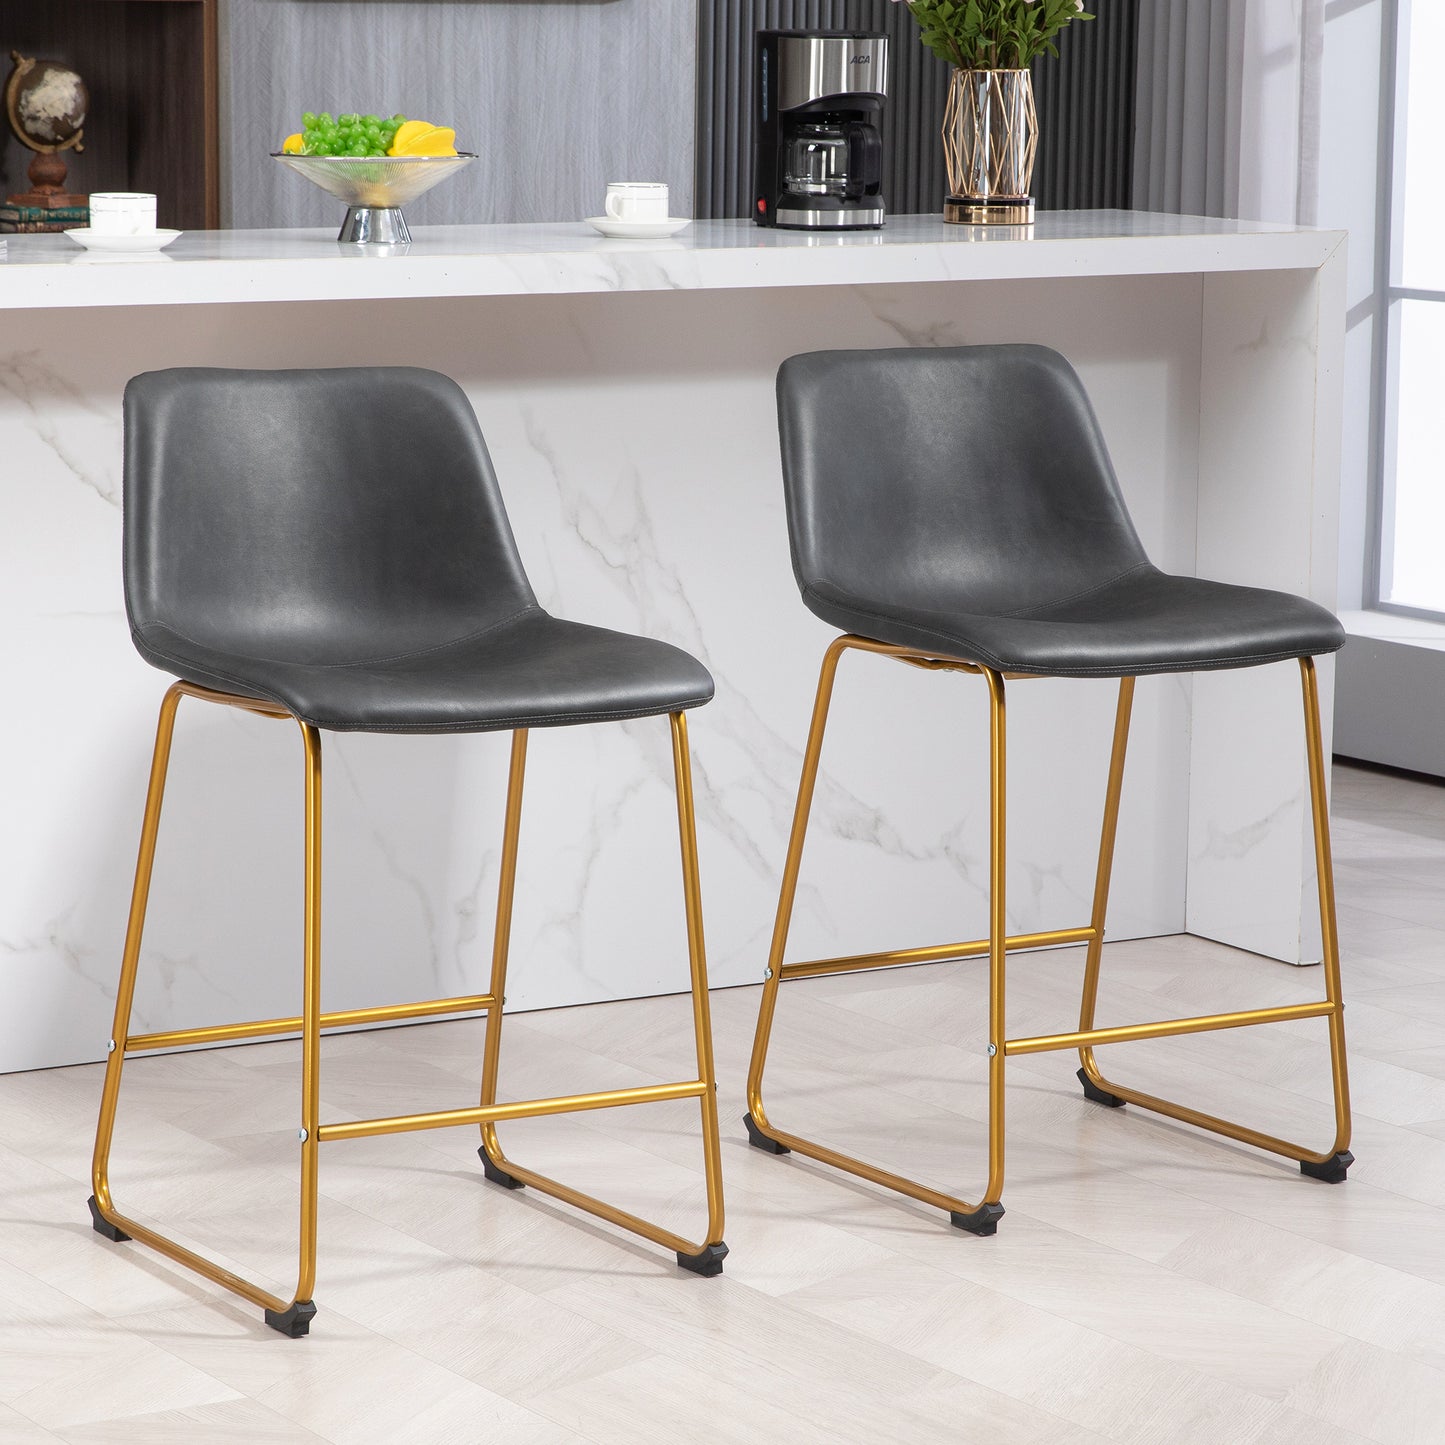 Counter Height Stools Set of 2, PU Leather Upholstered Stools for Kitchen Island, Modern Bar Chairs, Dark Grey at Gallery Canada